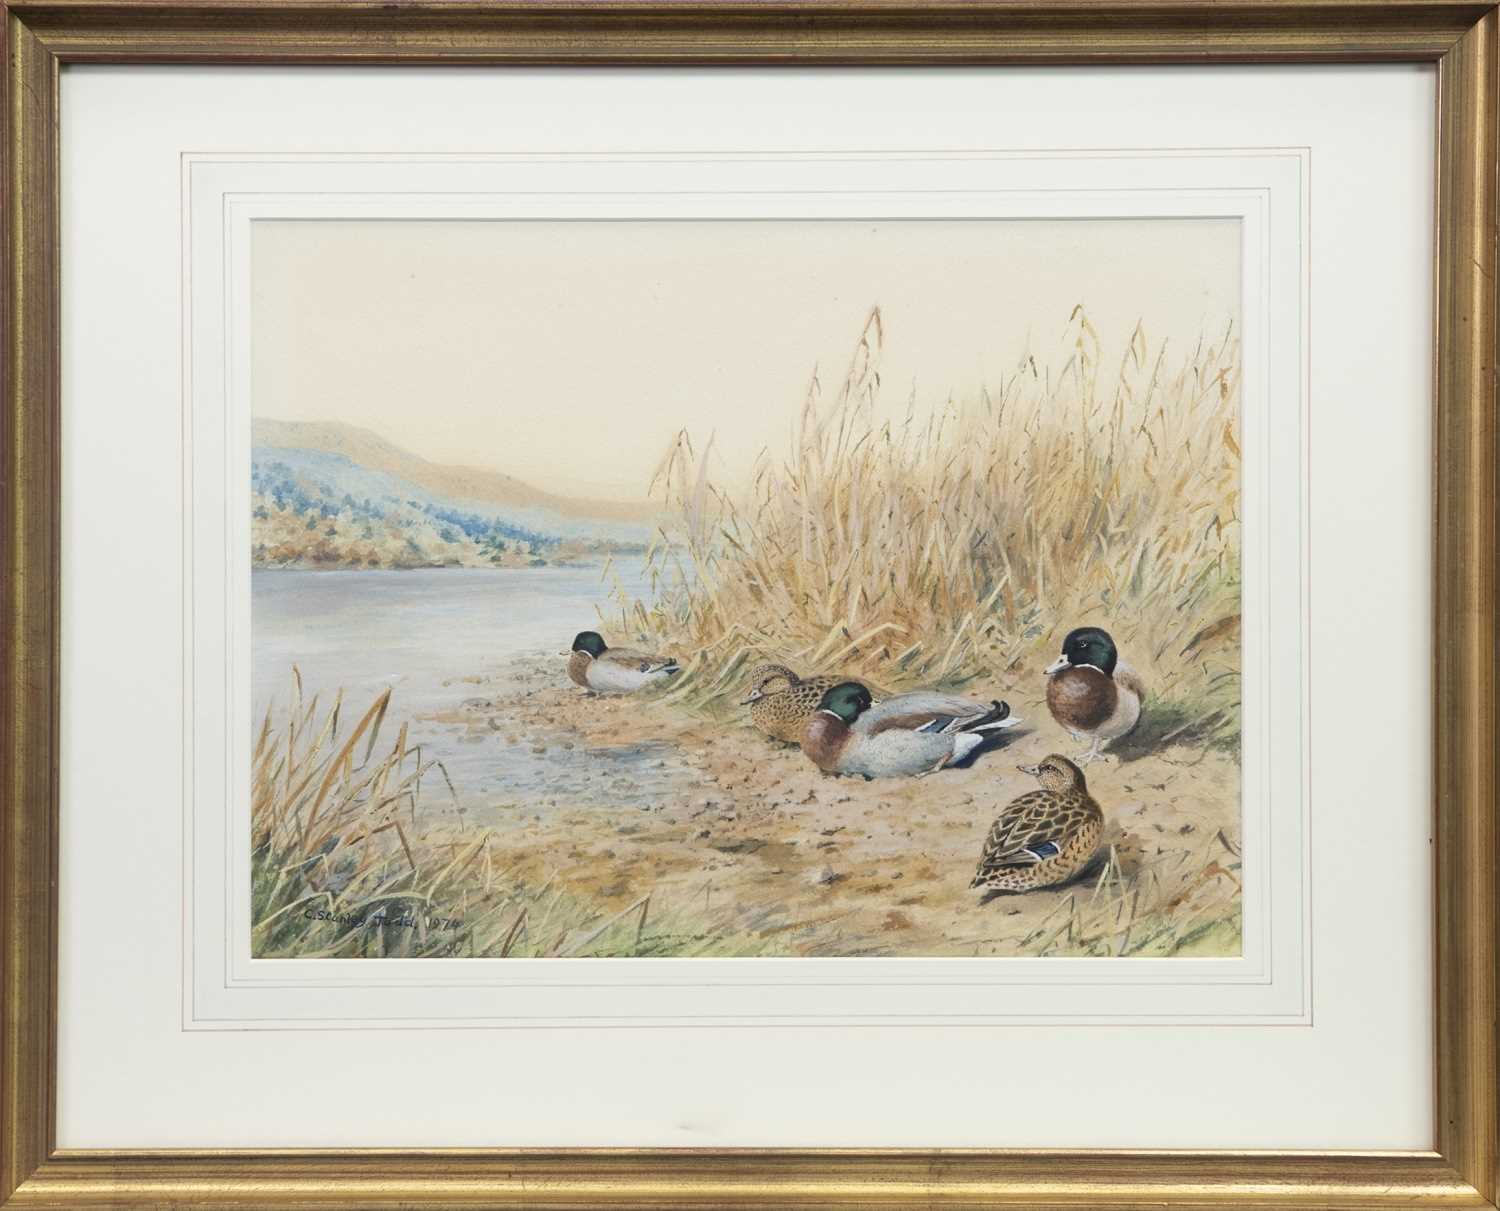 Lot 7 - DUCKS BY THE RIVER, A WATERCOLOUR BY CHARLES STANLEY TODD